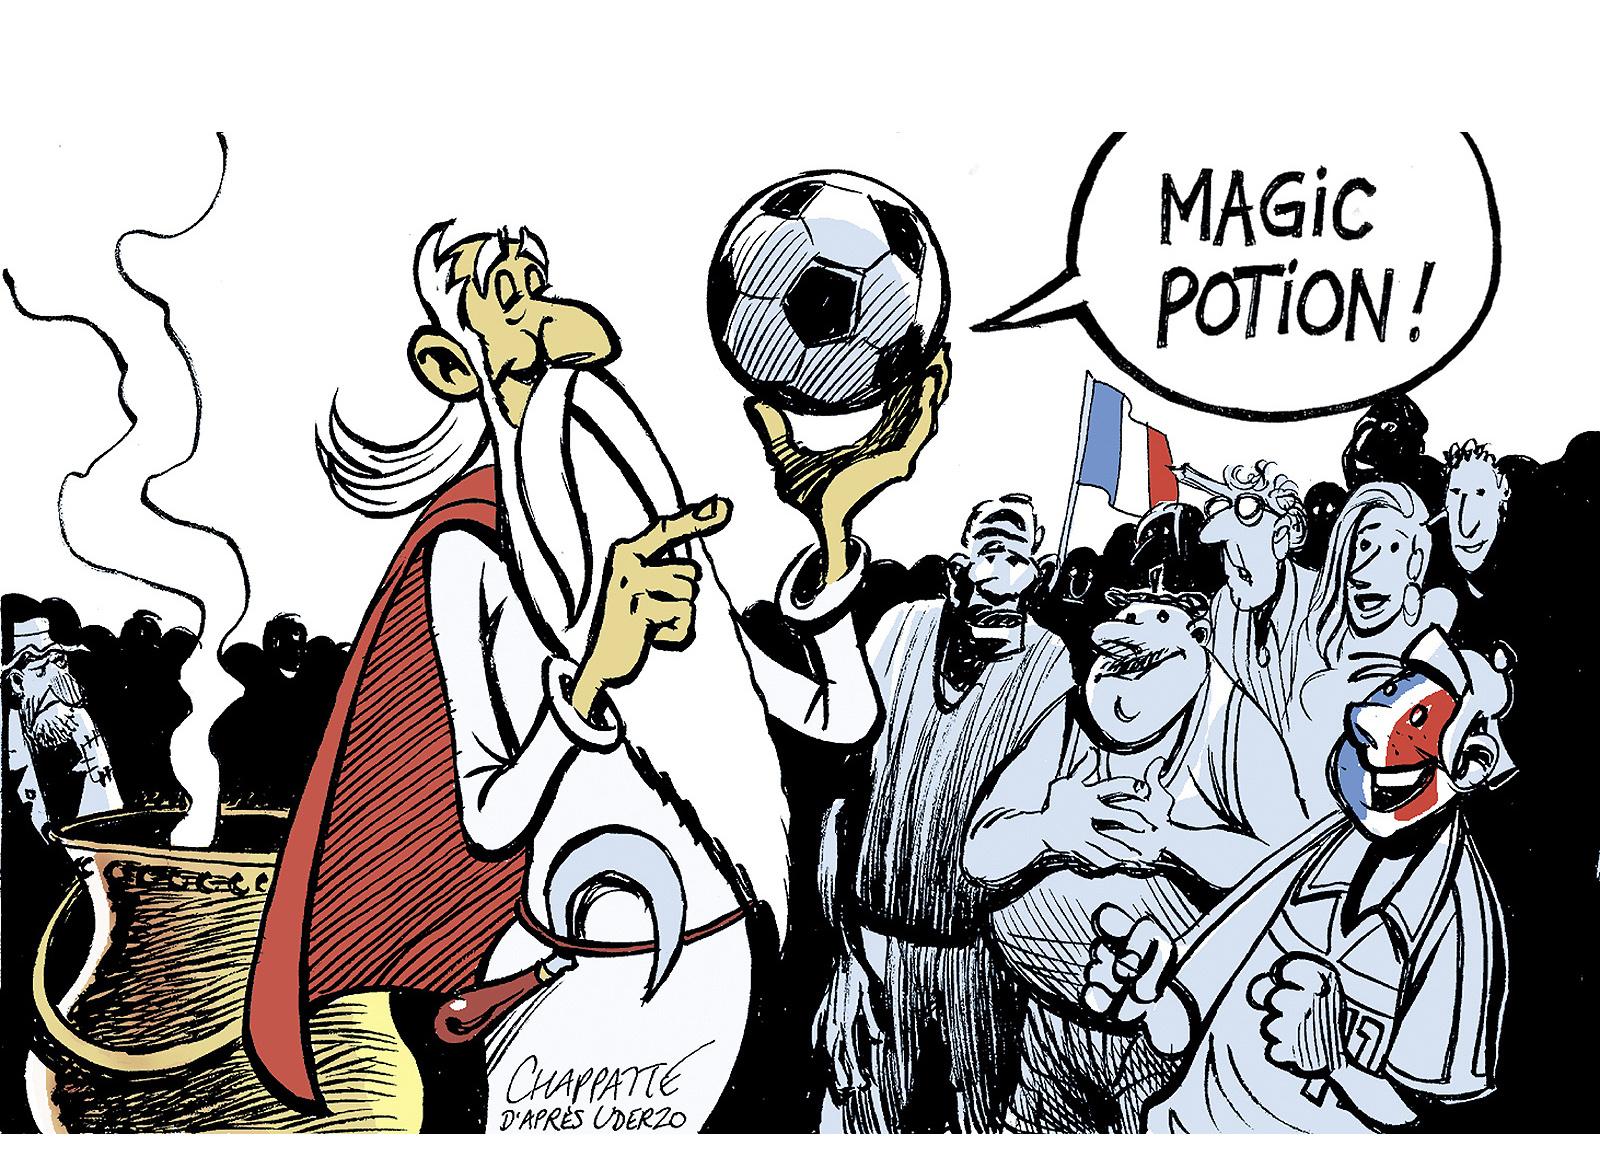 France wins the World Cup